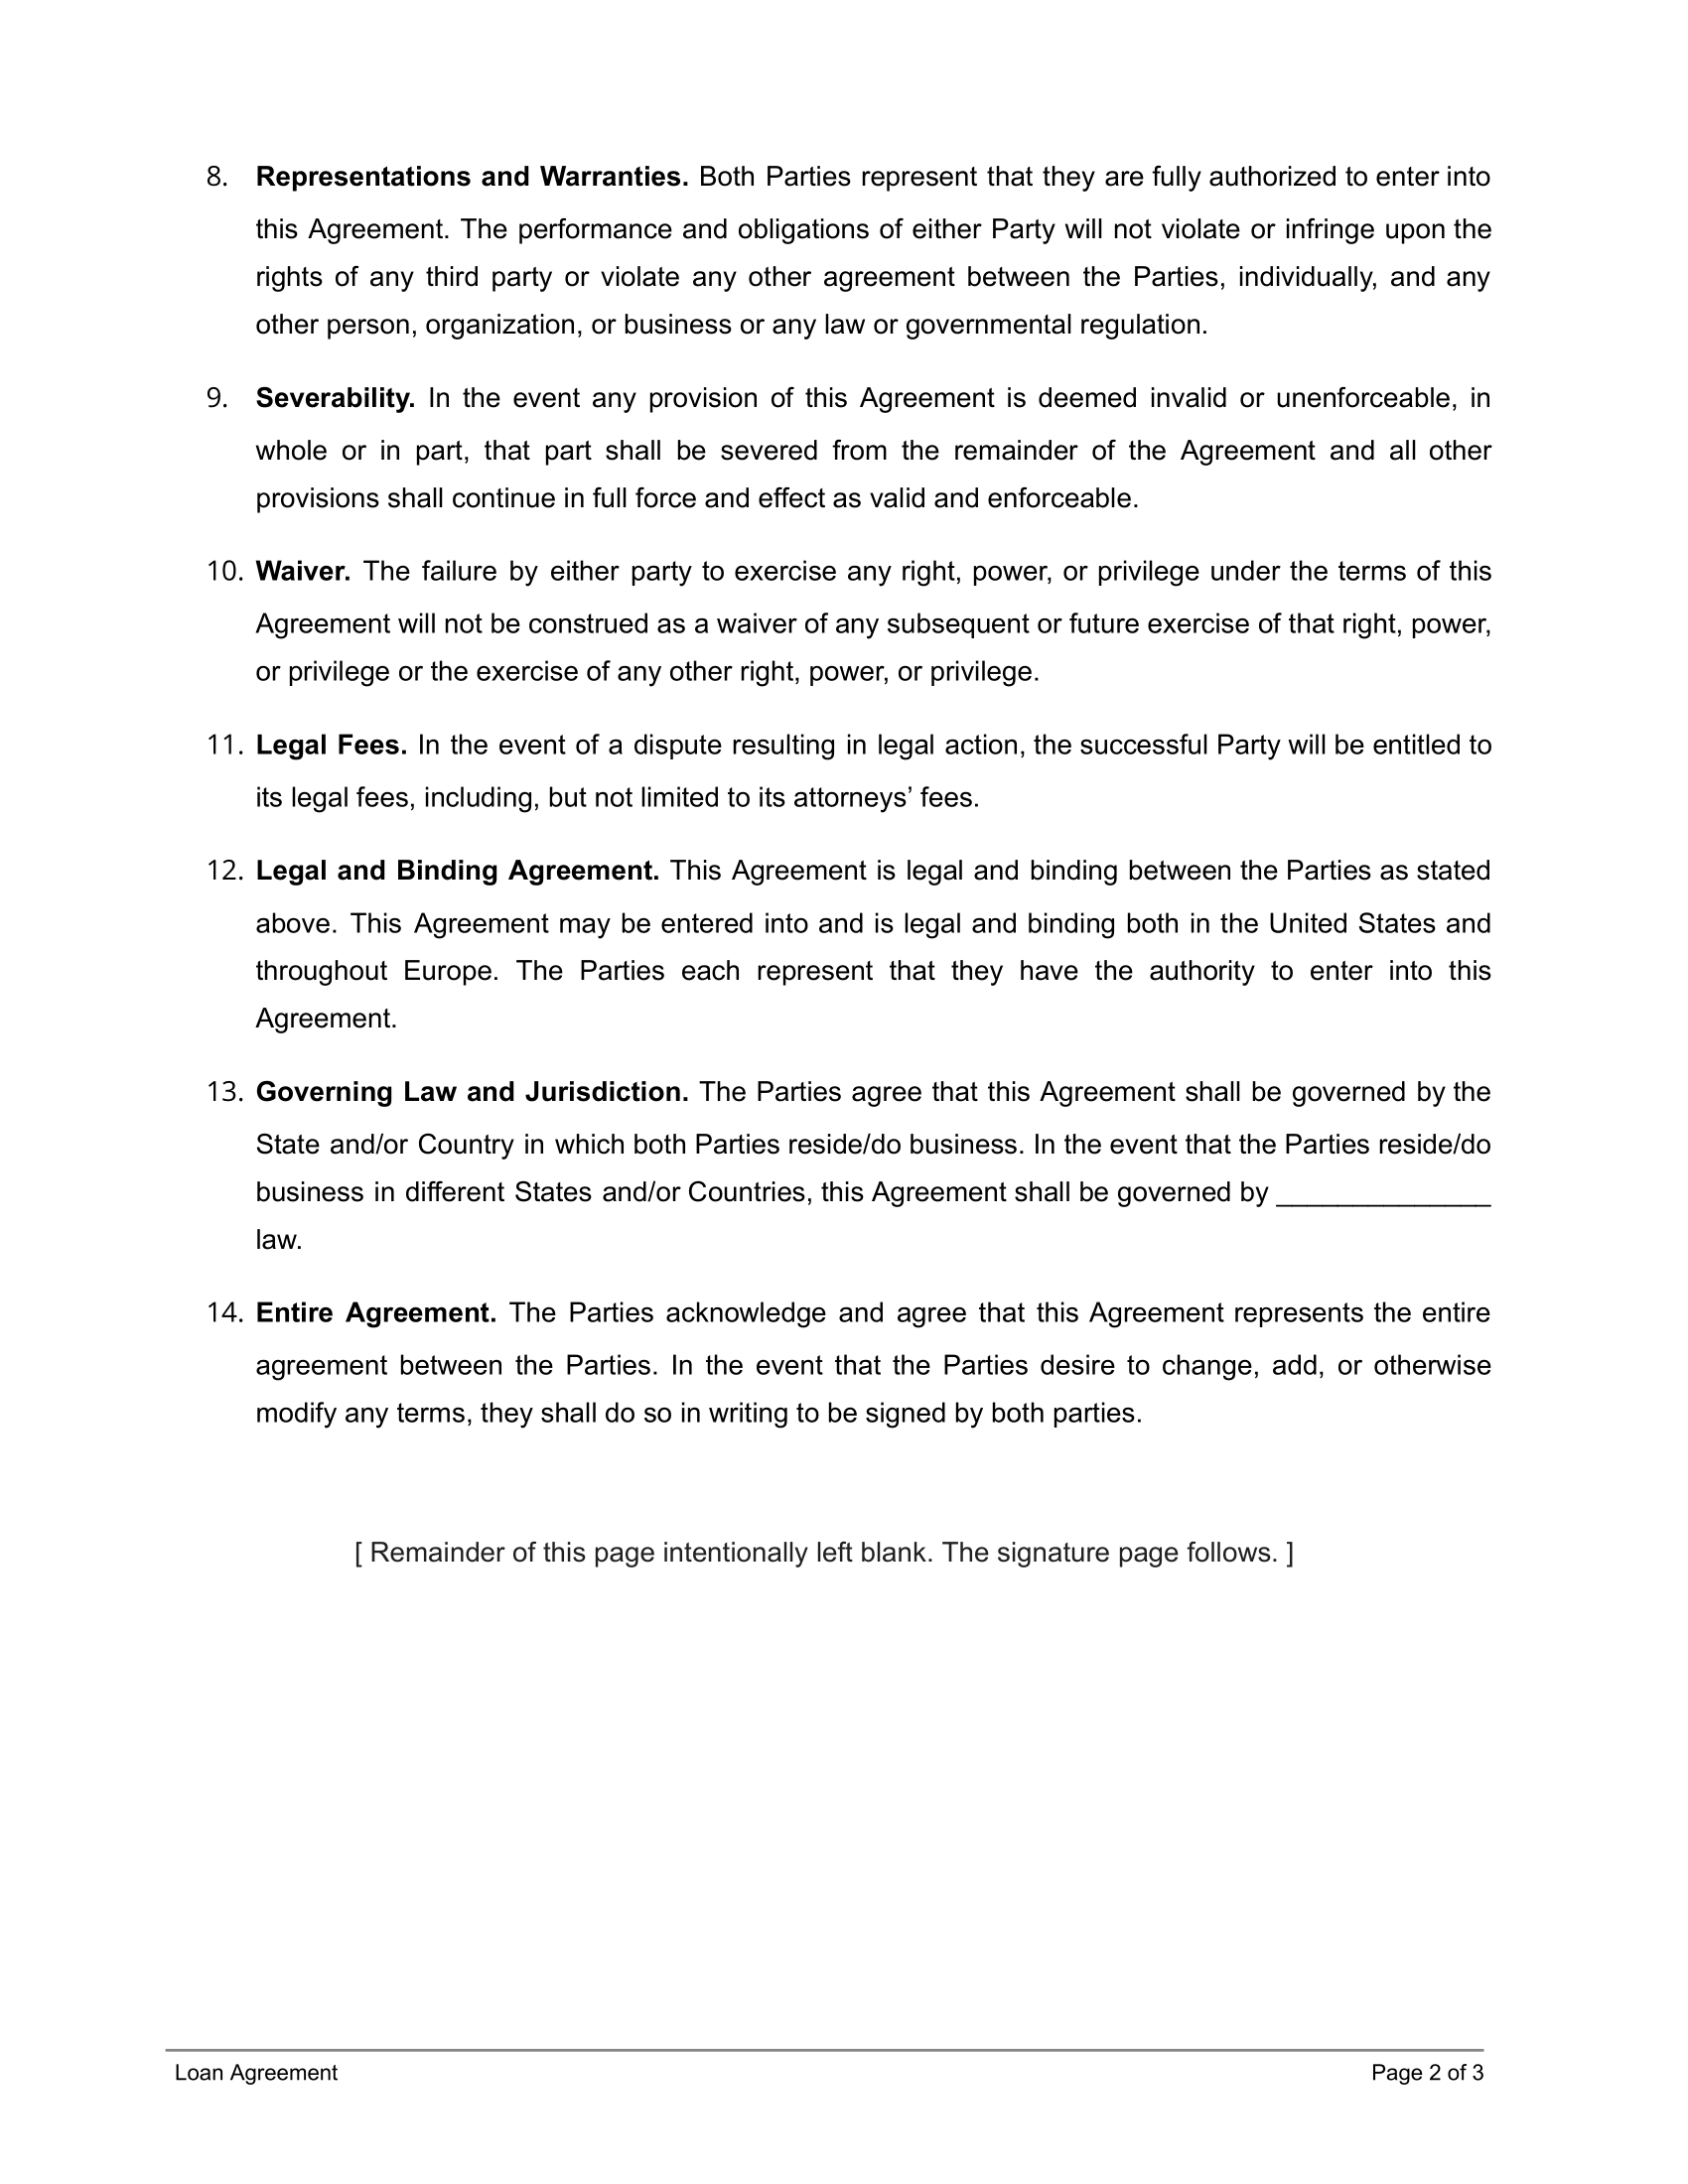 Loan Aggrement page 2